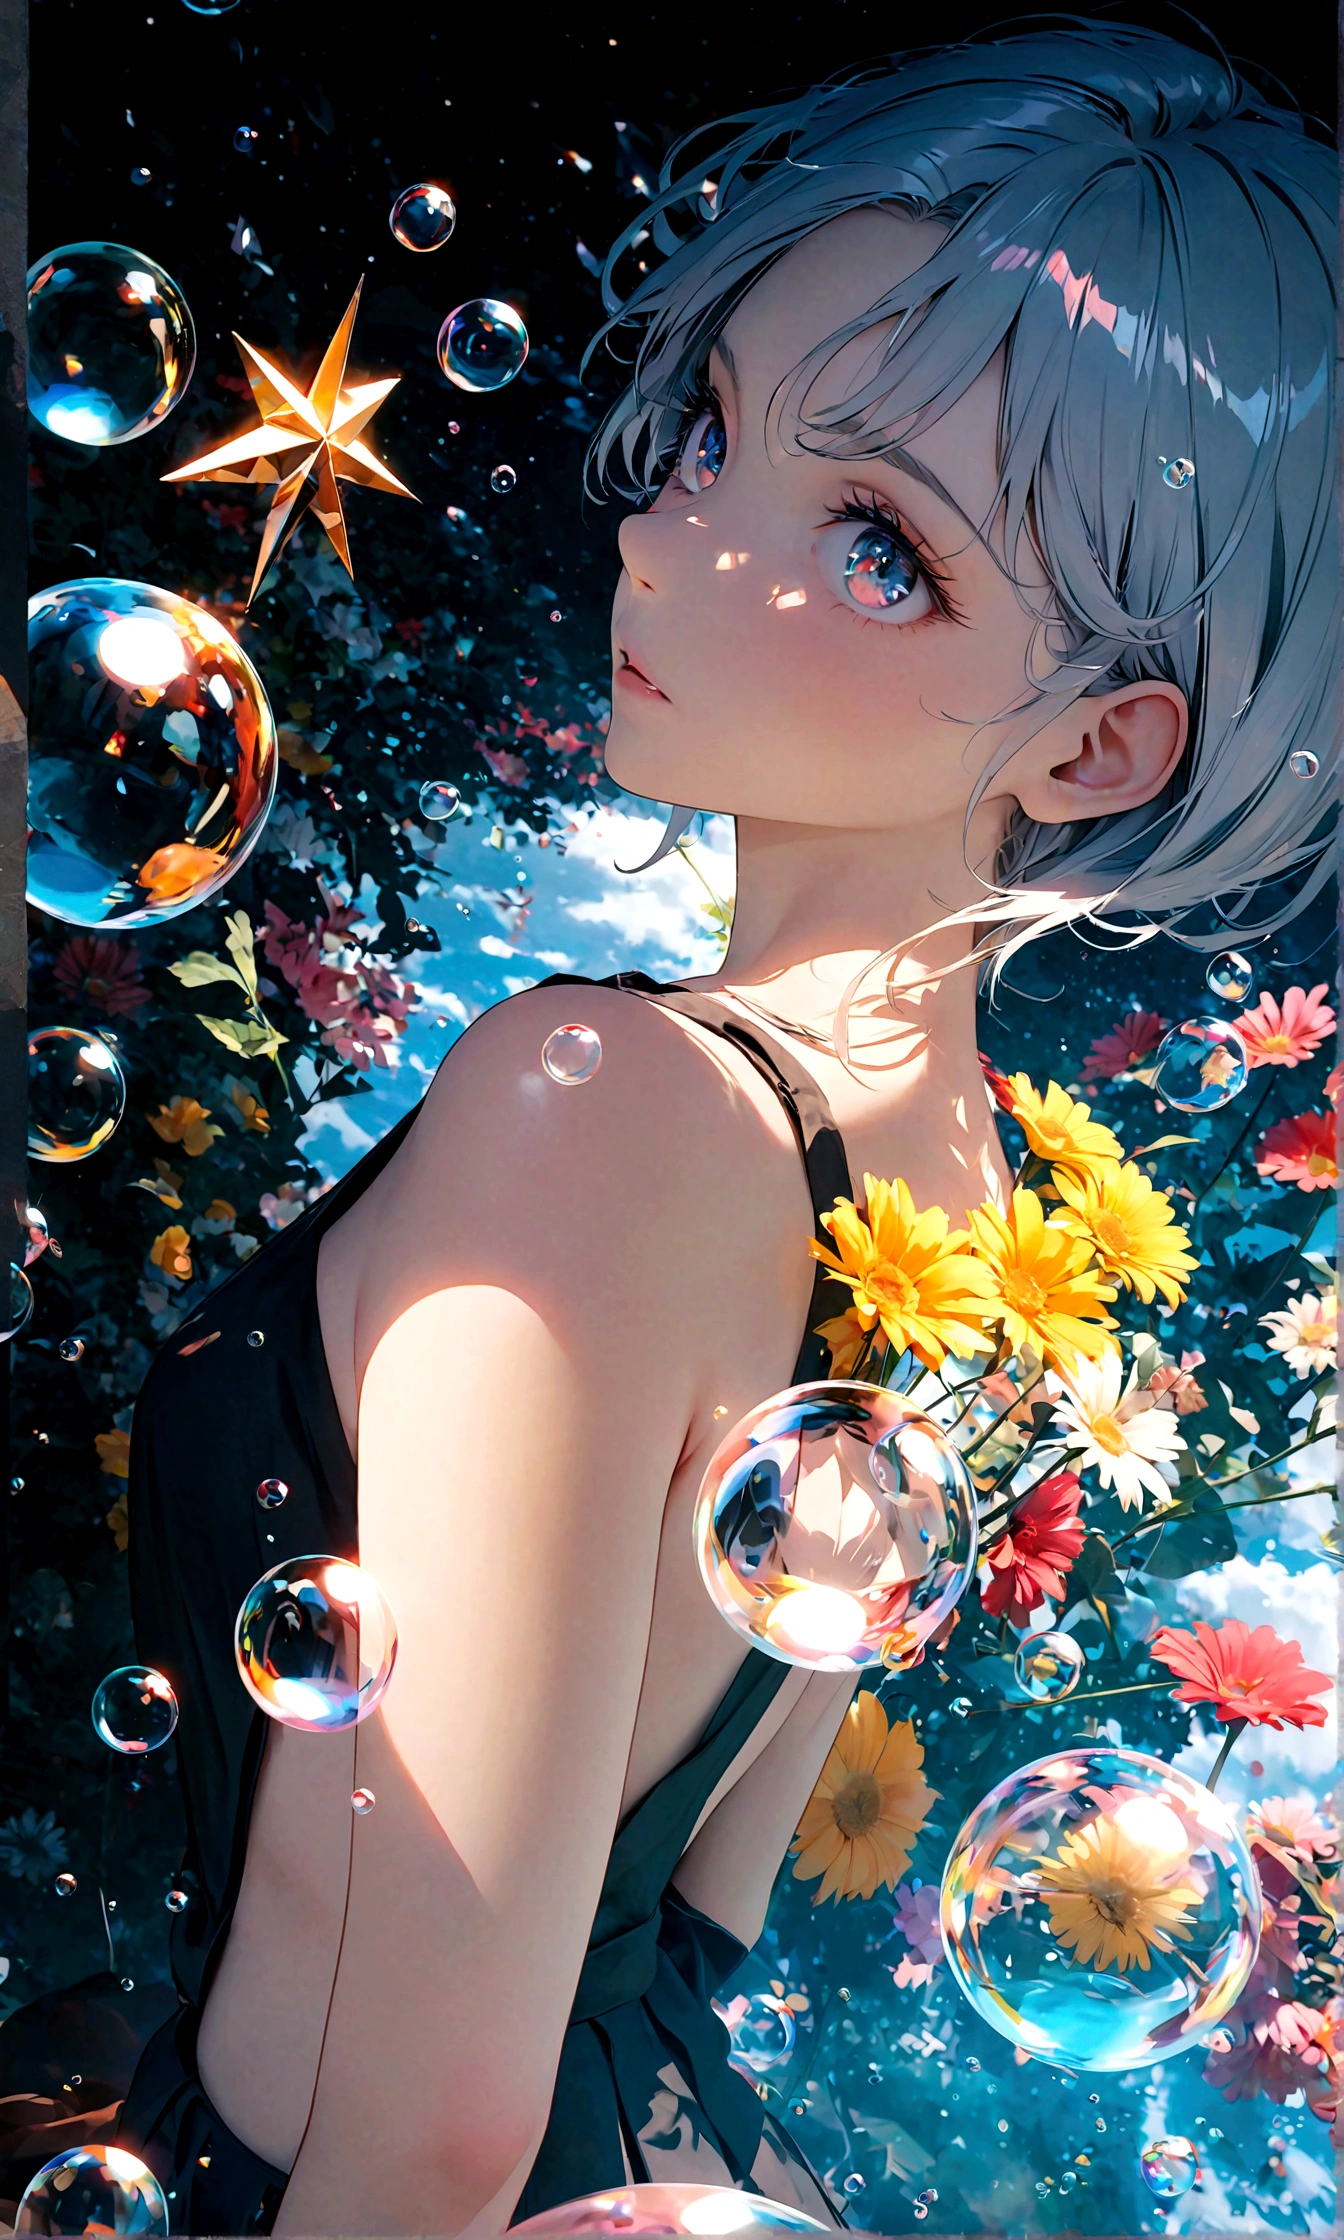 (masterpiece:1.2), (pale_skin:1.2), (alone:1.2), (woman)、(woman\(student, 20-year-old, ＪＫ, Short silver hair floating, Space-colored eyes, school black uniform, paleskin) Looking up at the sky), (A large glass-colored whale swims in the air), Beautiful sky, Beautiful Clouds, Colorful summer flowers are blooming everywhere., (Transparent bubbles shine like prisms here and there in the sky), There is a noon moon and a noon star in the sky, In a crowded downtown, BREAK ,quality\(8K,Highly detailed CG unit wallpaper, masterpiece,High resolution,top-quality,top-quality real texture skin,surreal,Increase the resolution,RAW Photos,highest quality,Very detailed,wallpaper,Cinema Lighting,Ray-tracing,Golden Ratio\),(Long Shot),Wide Shot,